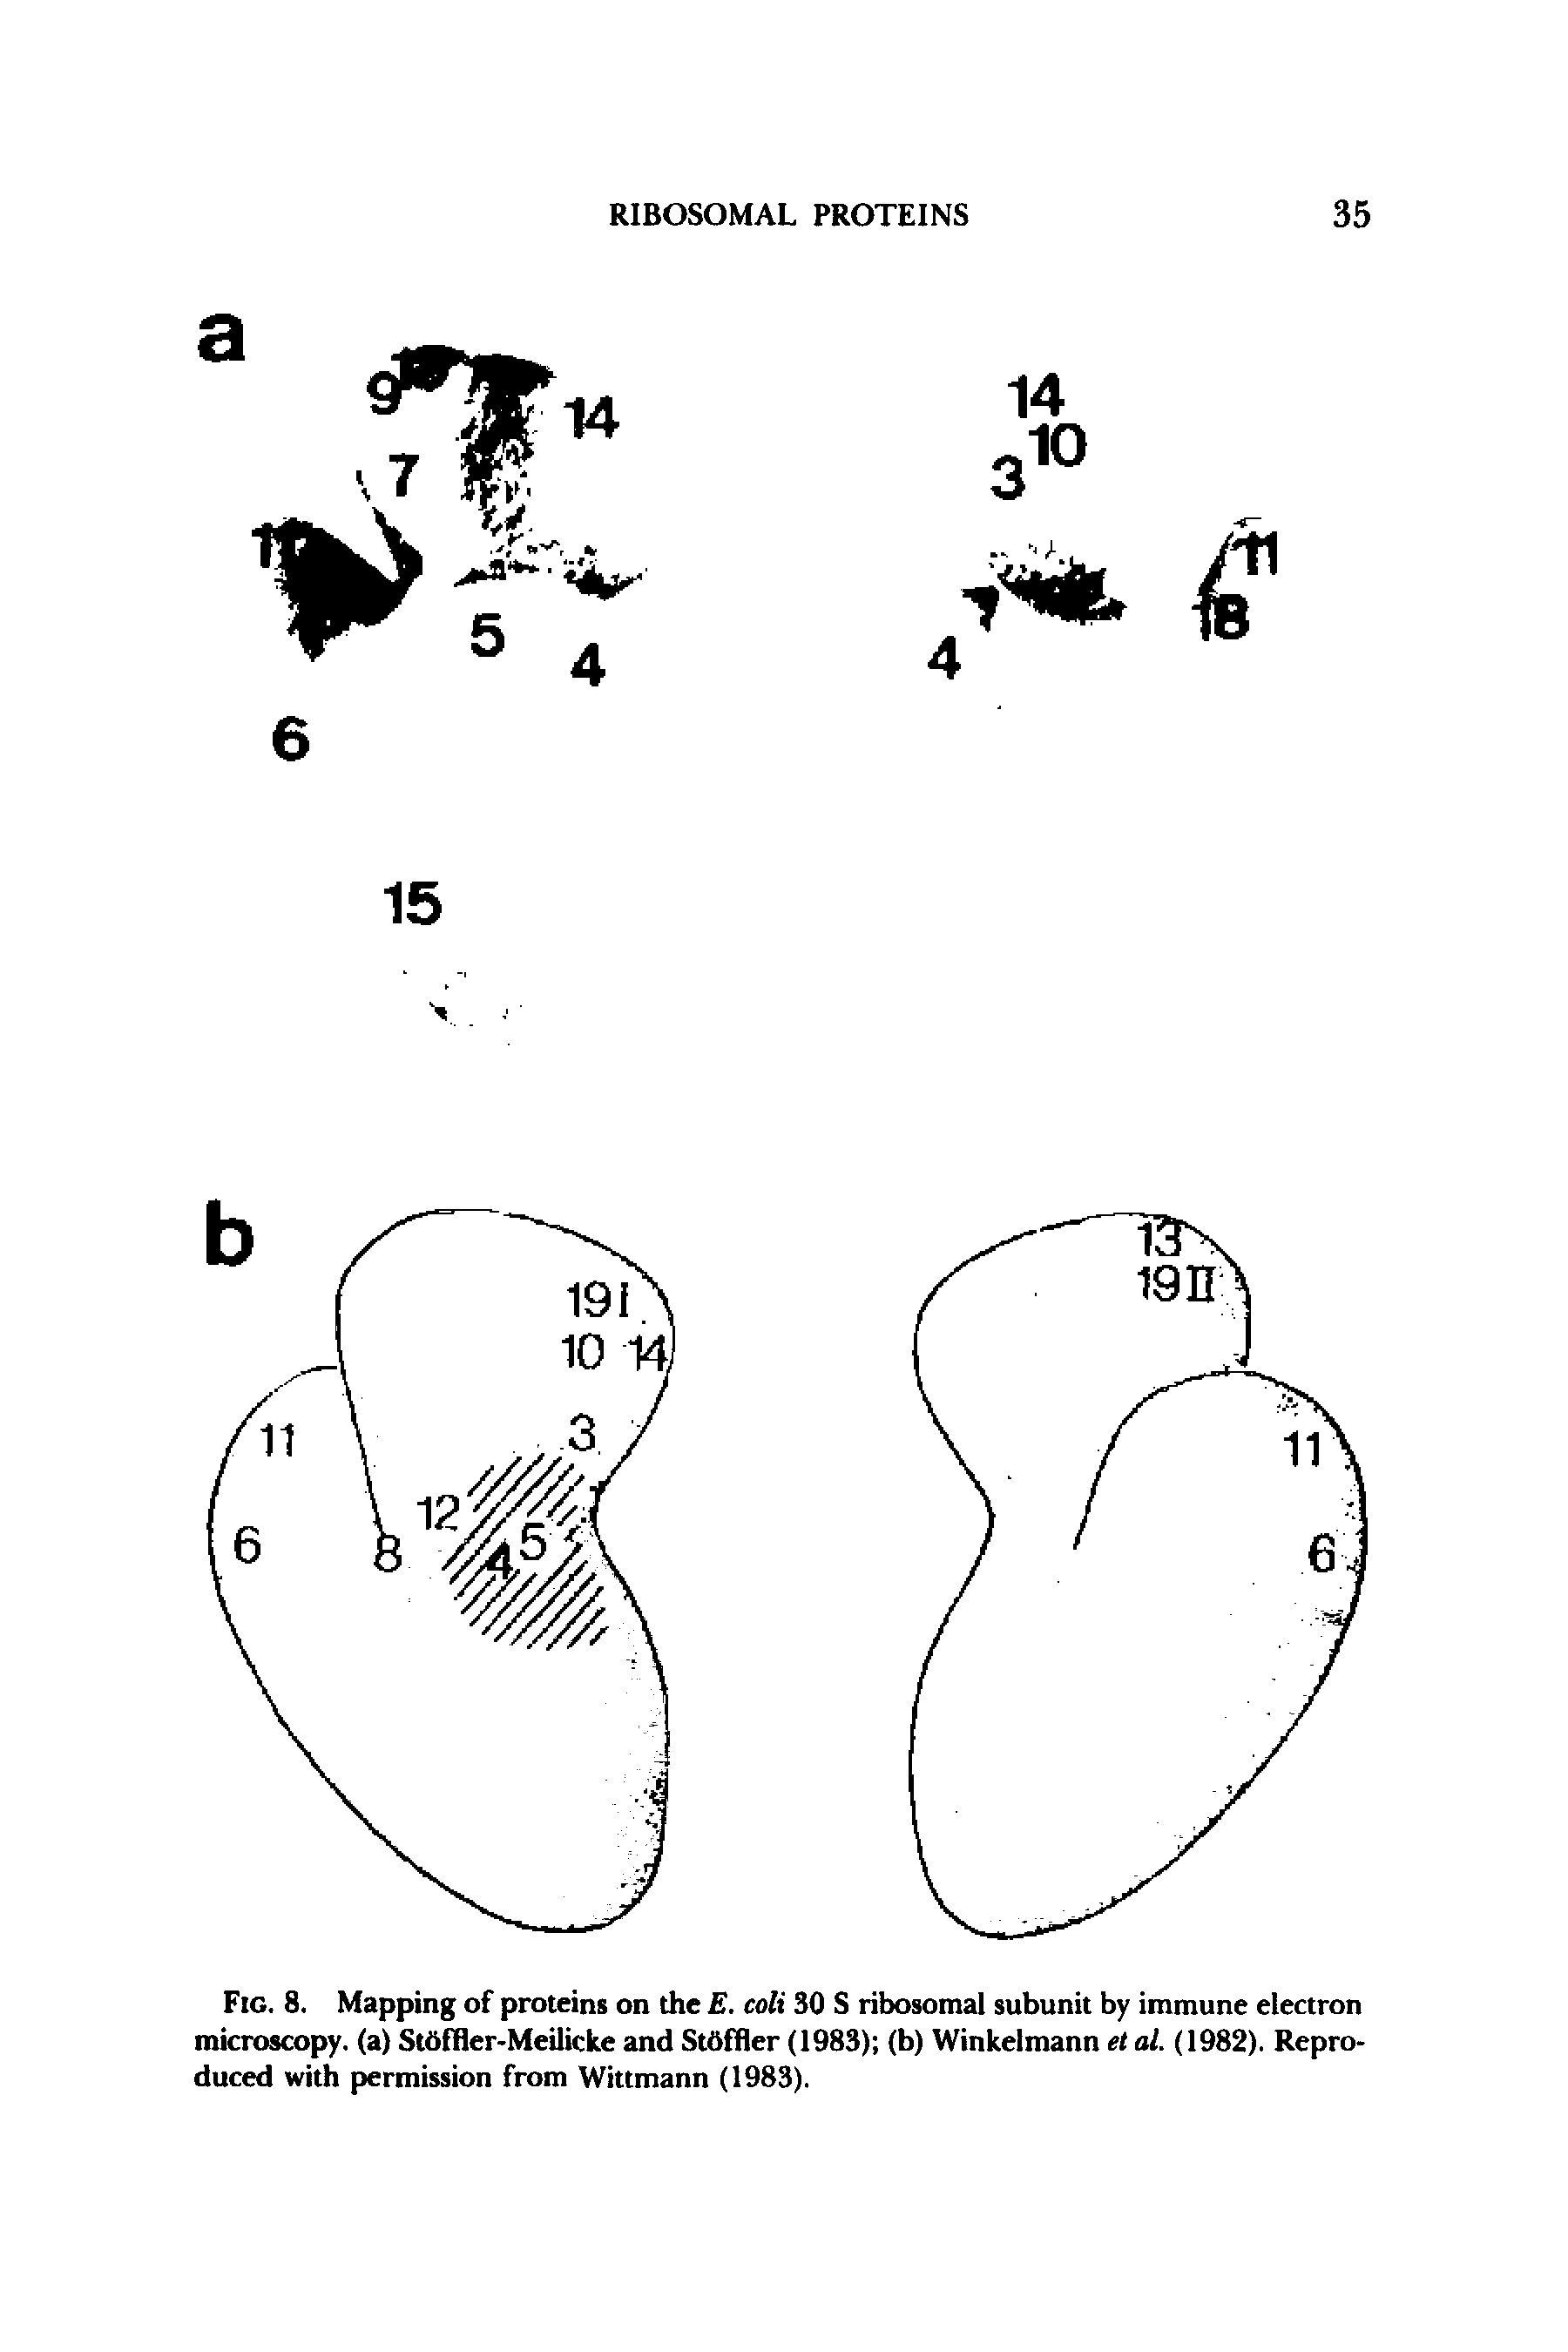 Fig. 8. Mapping of proteins on the E. colt 30 S ribosomal subunit by immune electron microscopy, (a) StbfBer-Meilicke and StOffler (1983) (b) Winkelmann et al. (1982). Reproduced with permission from Wittmann (1983).